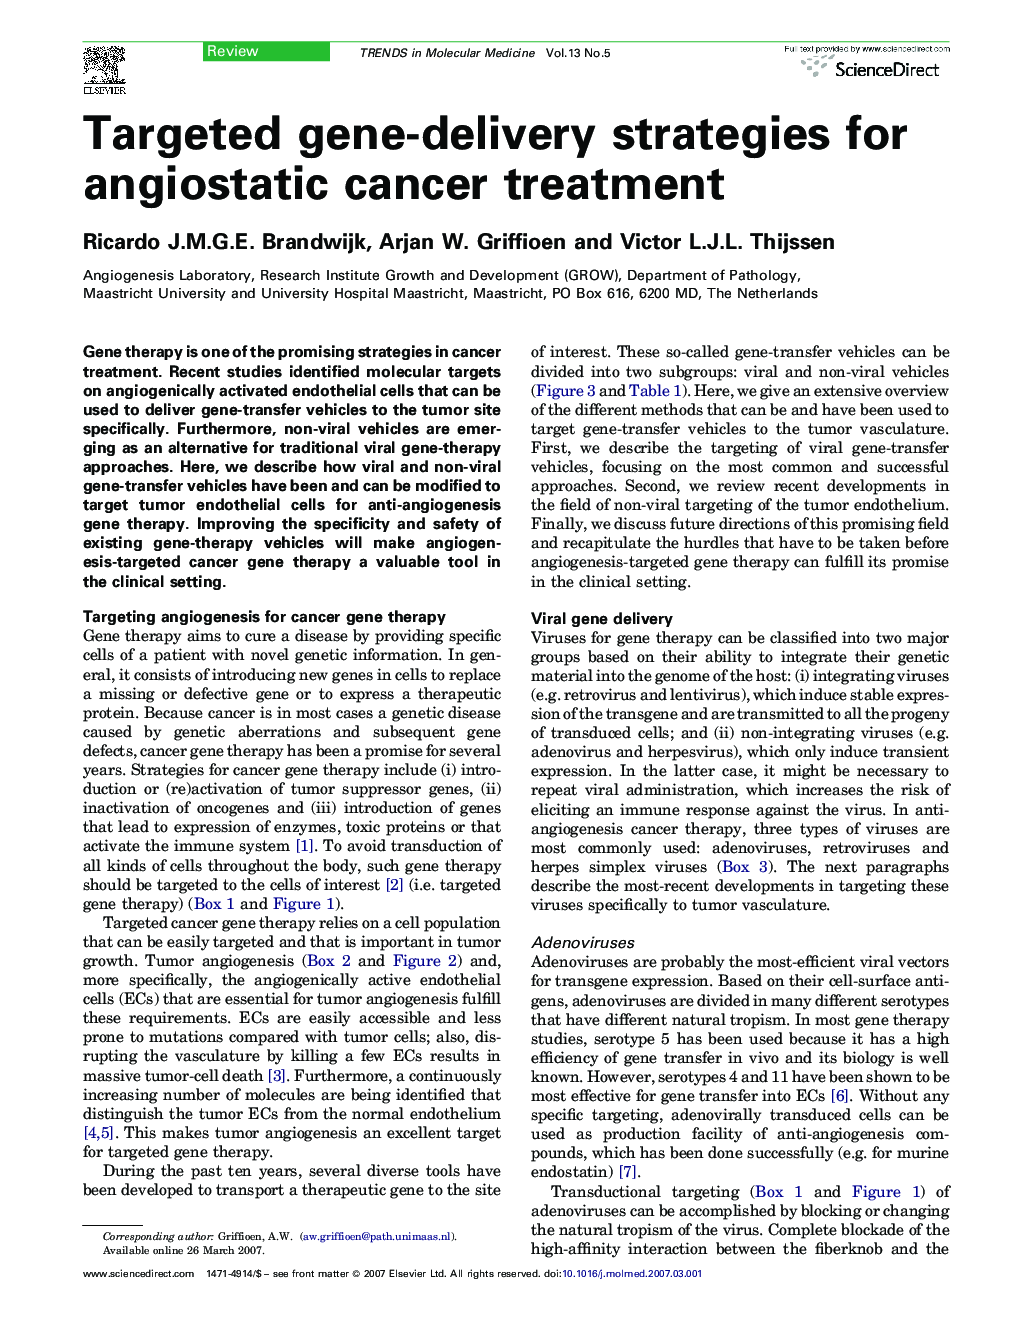 Targeted gene-delivery strategies for angiostatic cancer treatment